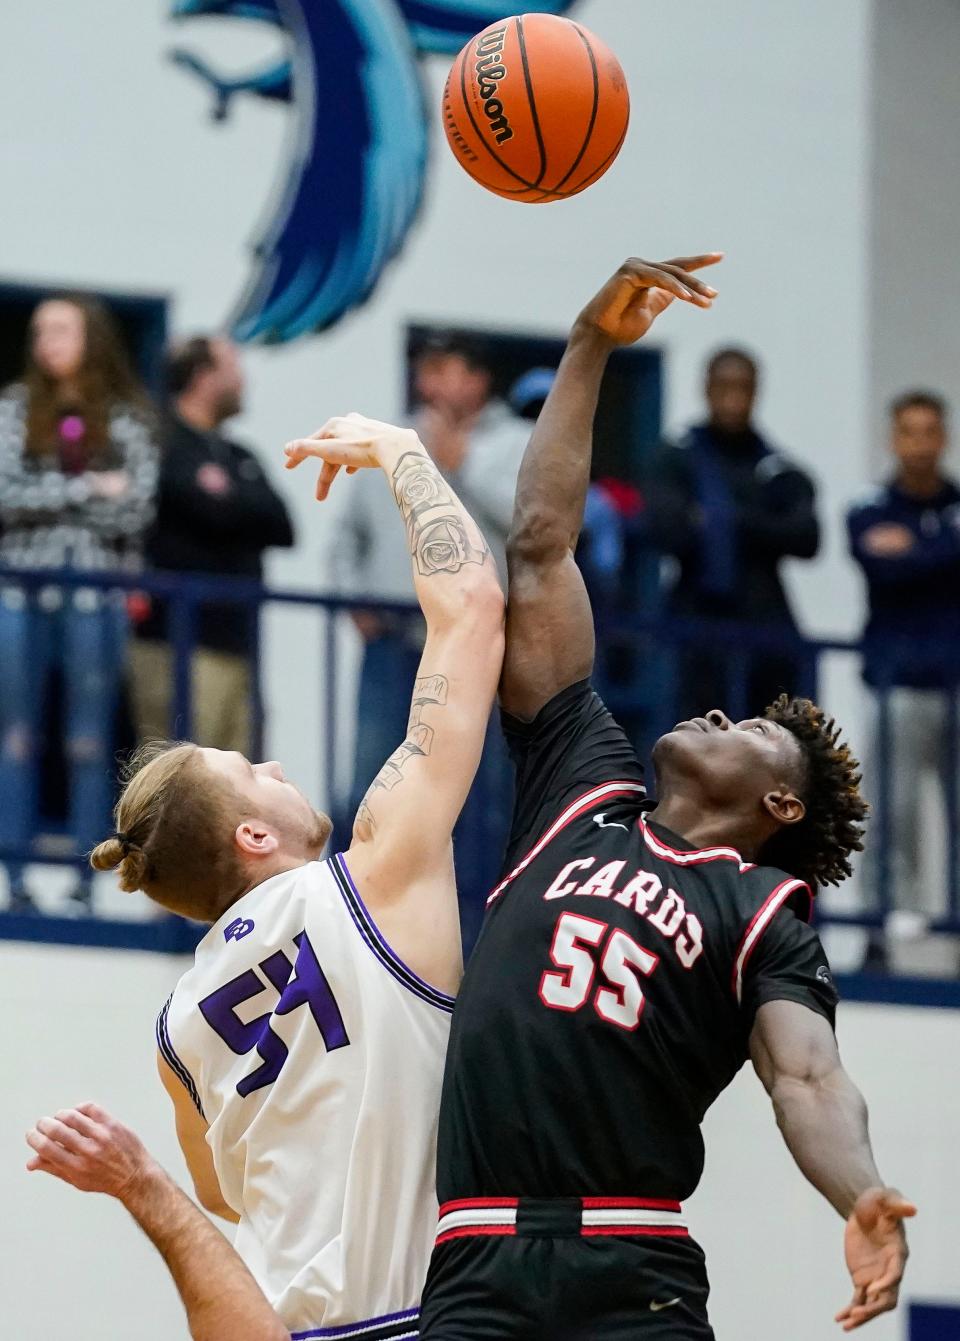 Ben Davis Giants center Zane Doughty (54) and Southport Cardinals Nickens Lemba (55) reach for the ball during tip-off Wednesday, March 1, 2023 at Perry Meridian High School in Indianapolis. The Ben Davis Giants defeated the Southport Cardinals, 62-46.